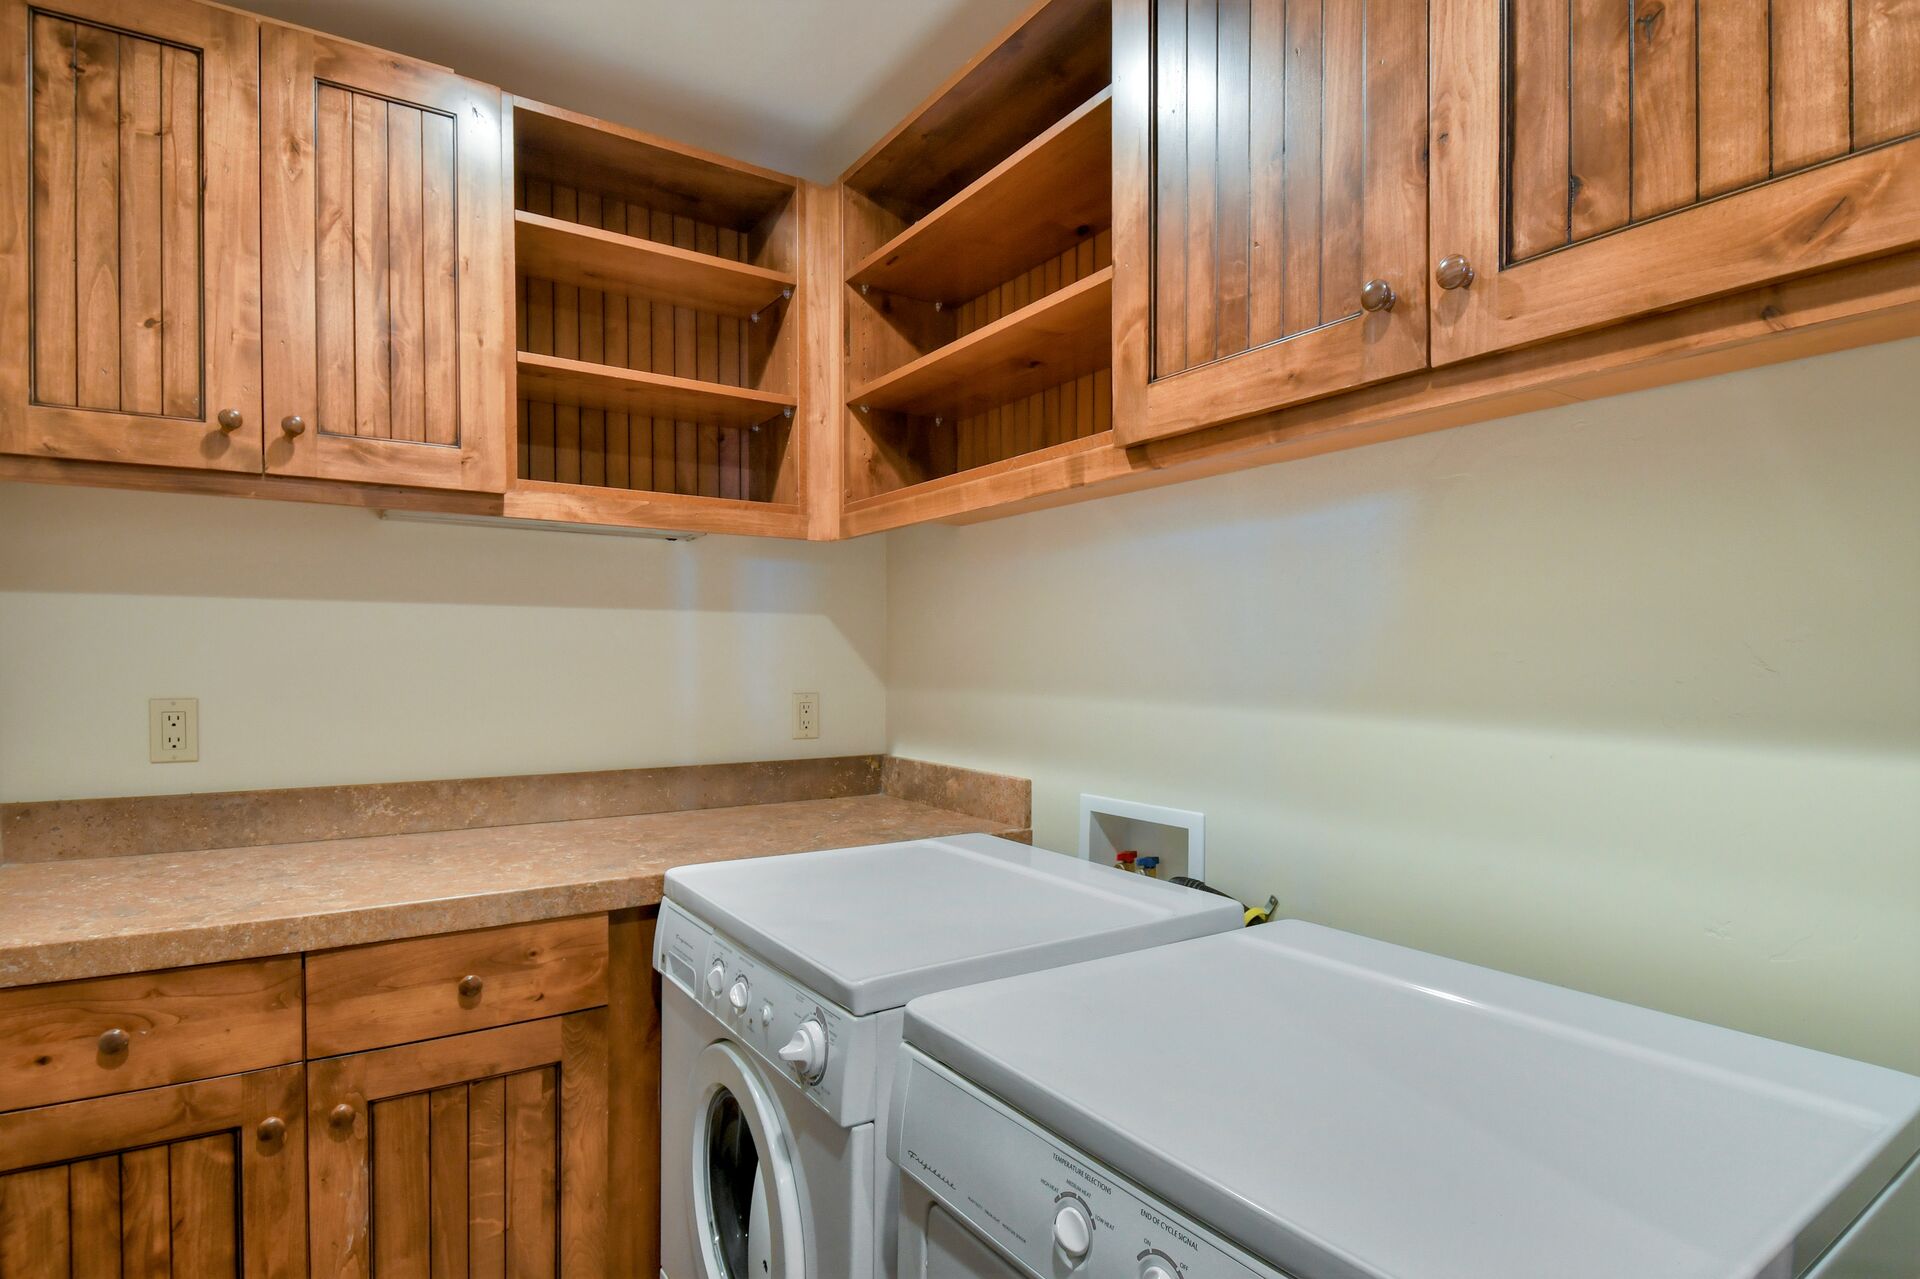 Laundry room to wash and hang clothes during stay. Supplies are complimentary.